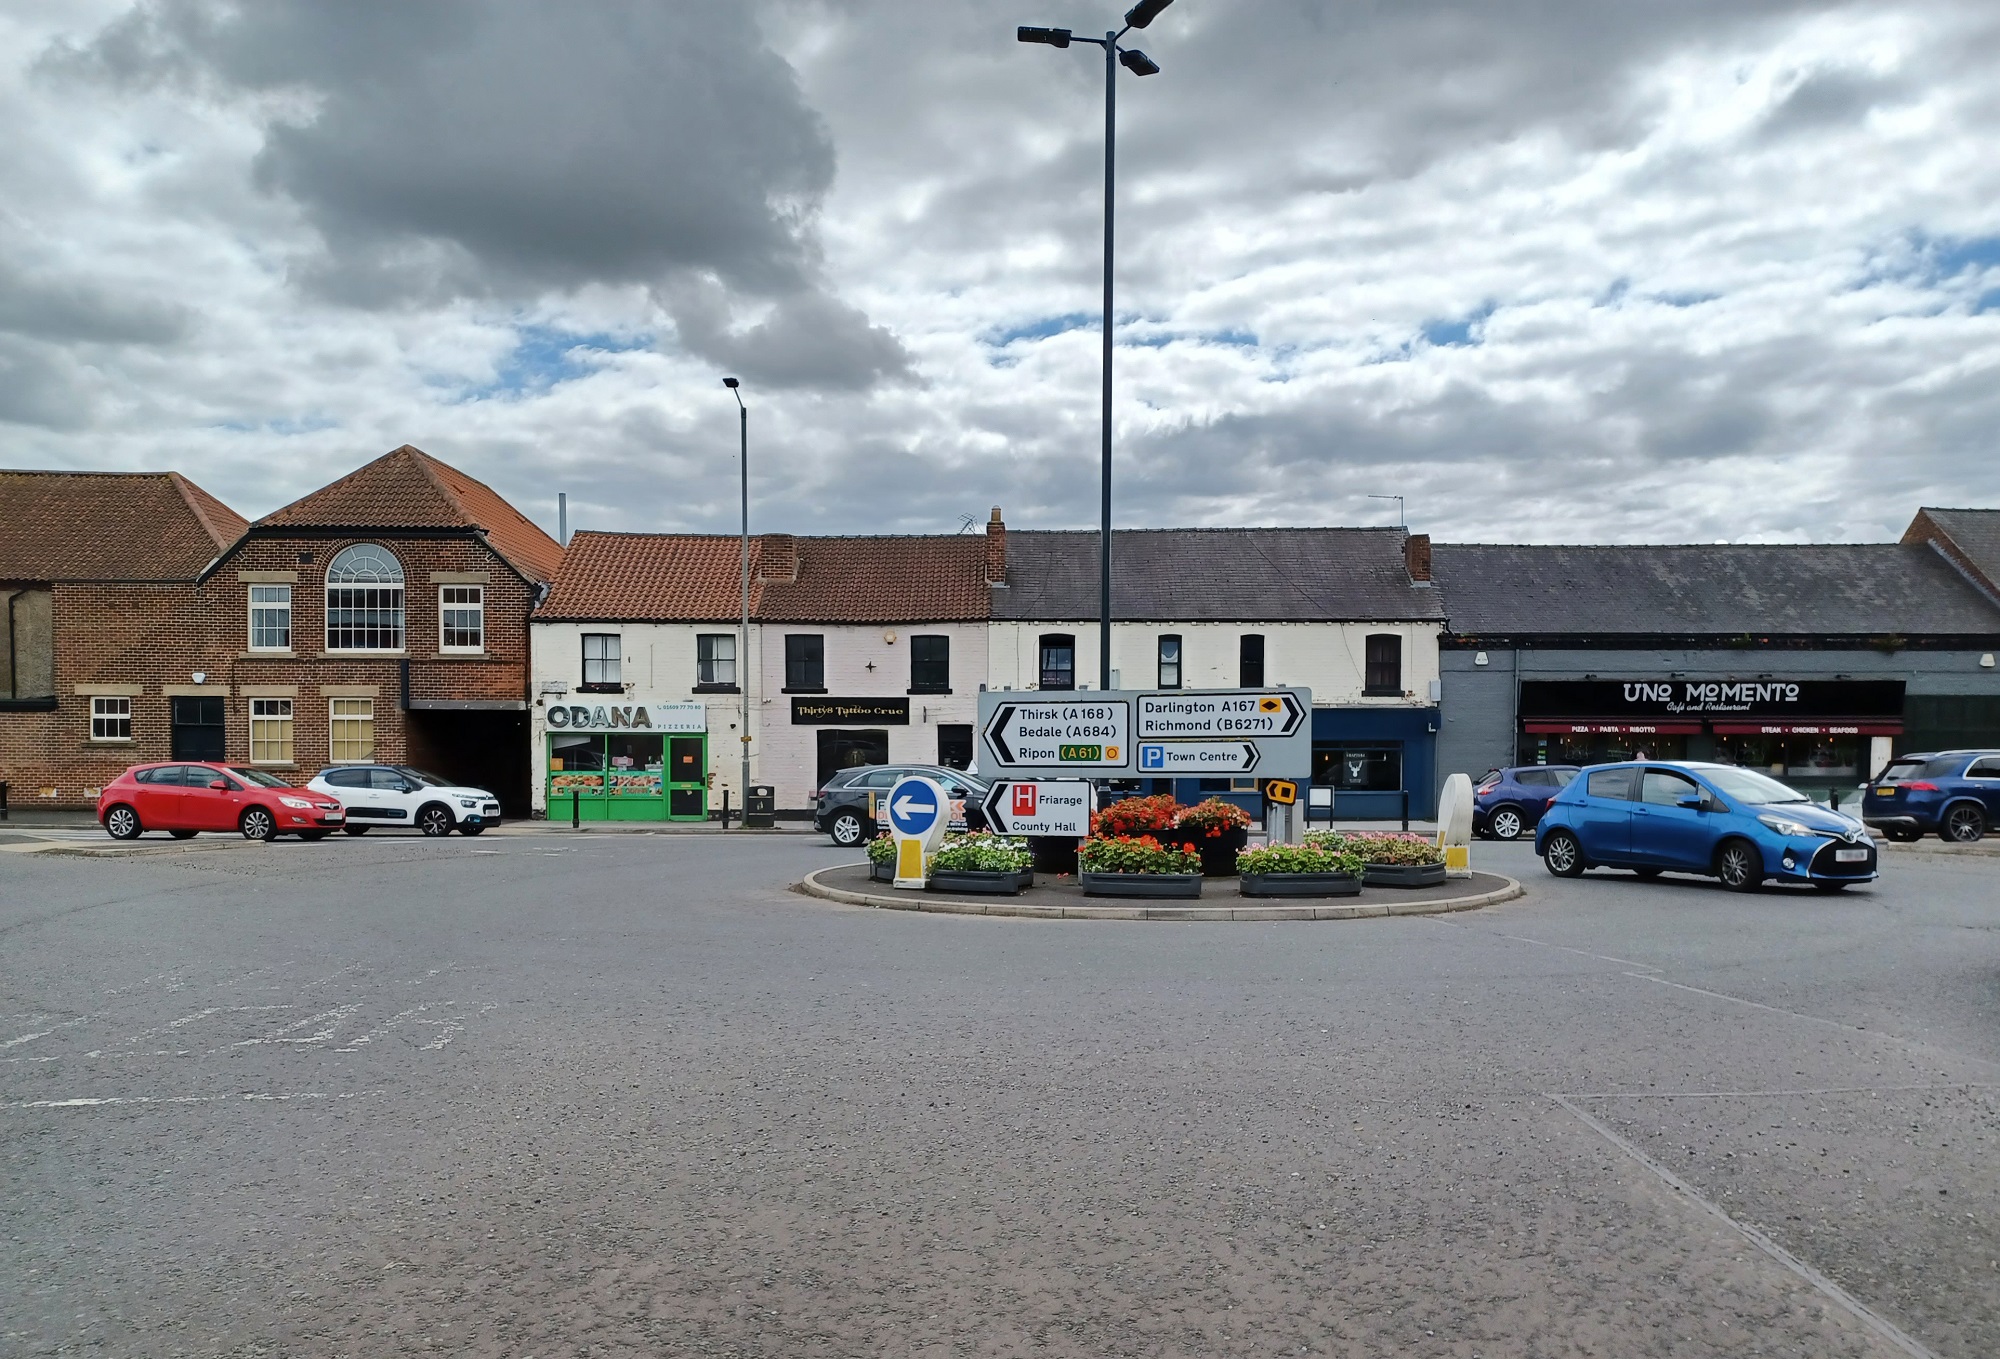 The Marks and Spencer roundabout on Friarage Street in Northallerton, which is part of the upcoming resurfacing scheme.